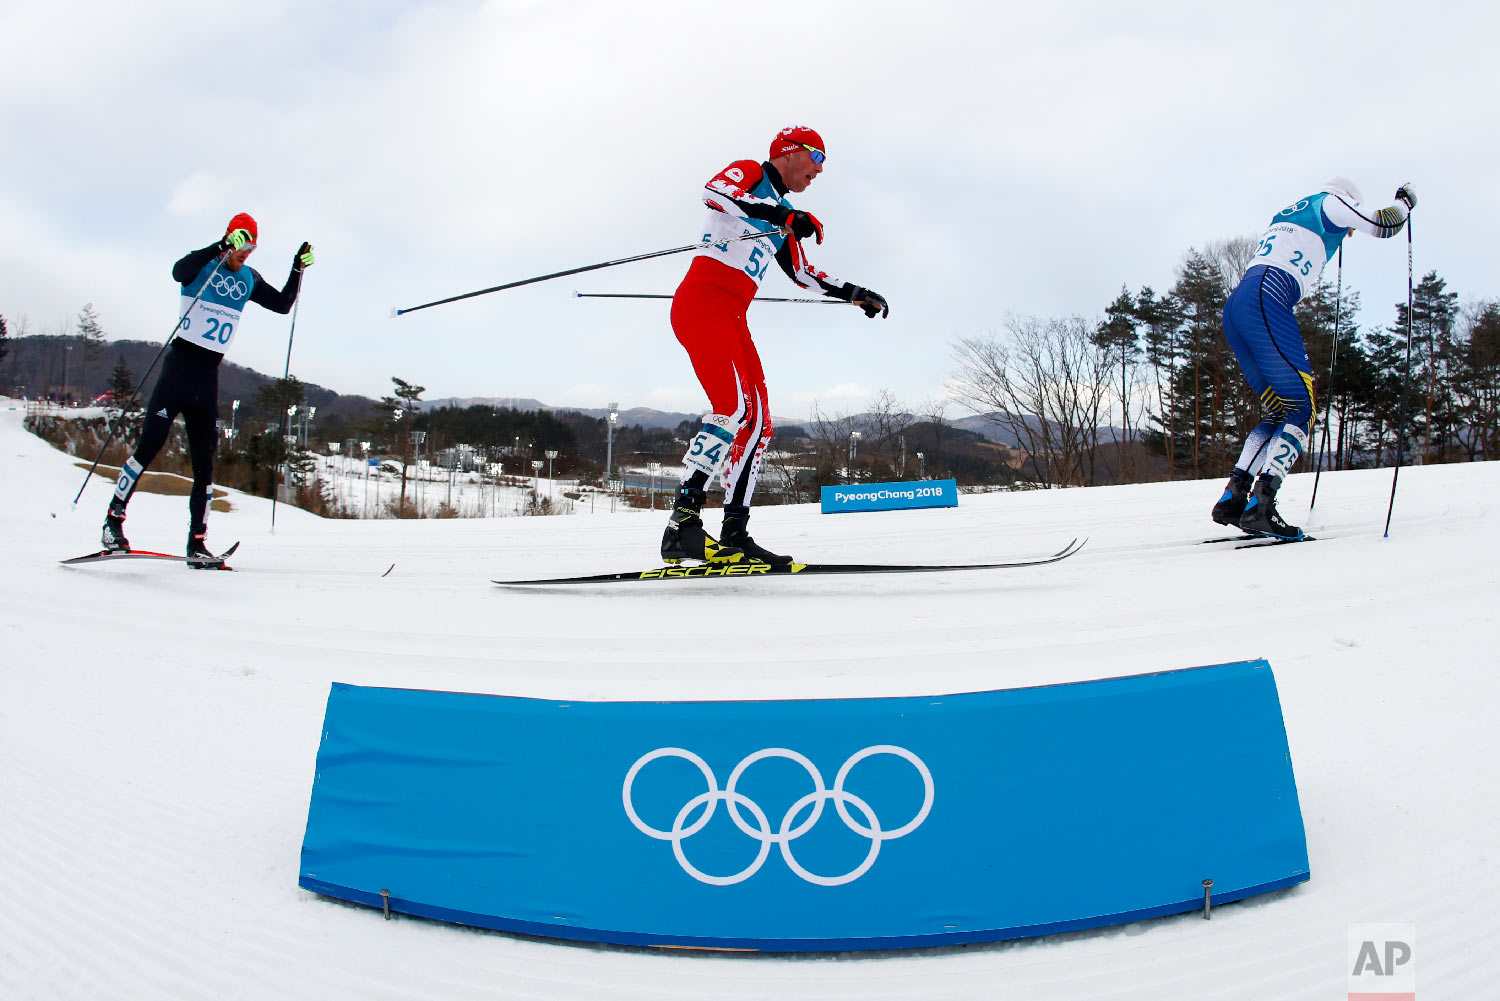  Skiers compete during the men's 15km/15km skiathlon cross-country skiing competition at the 2018 Winter Olympics in Pyeongchang, South Korea, Sunday, Feb. 11, 2018. (AP Photo/Matthias Schrader) 